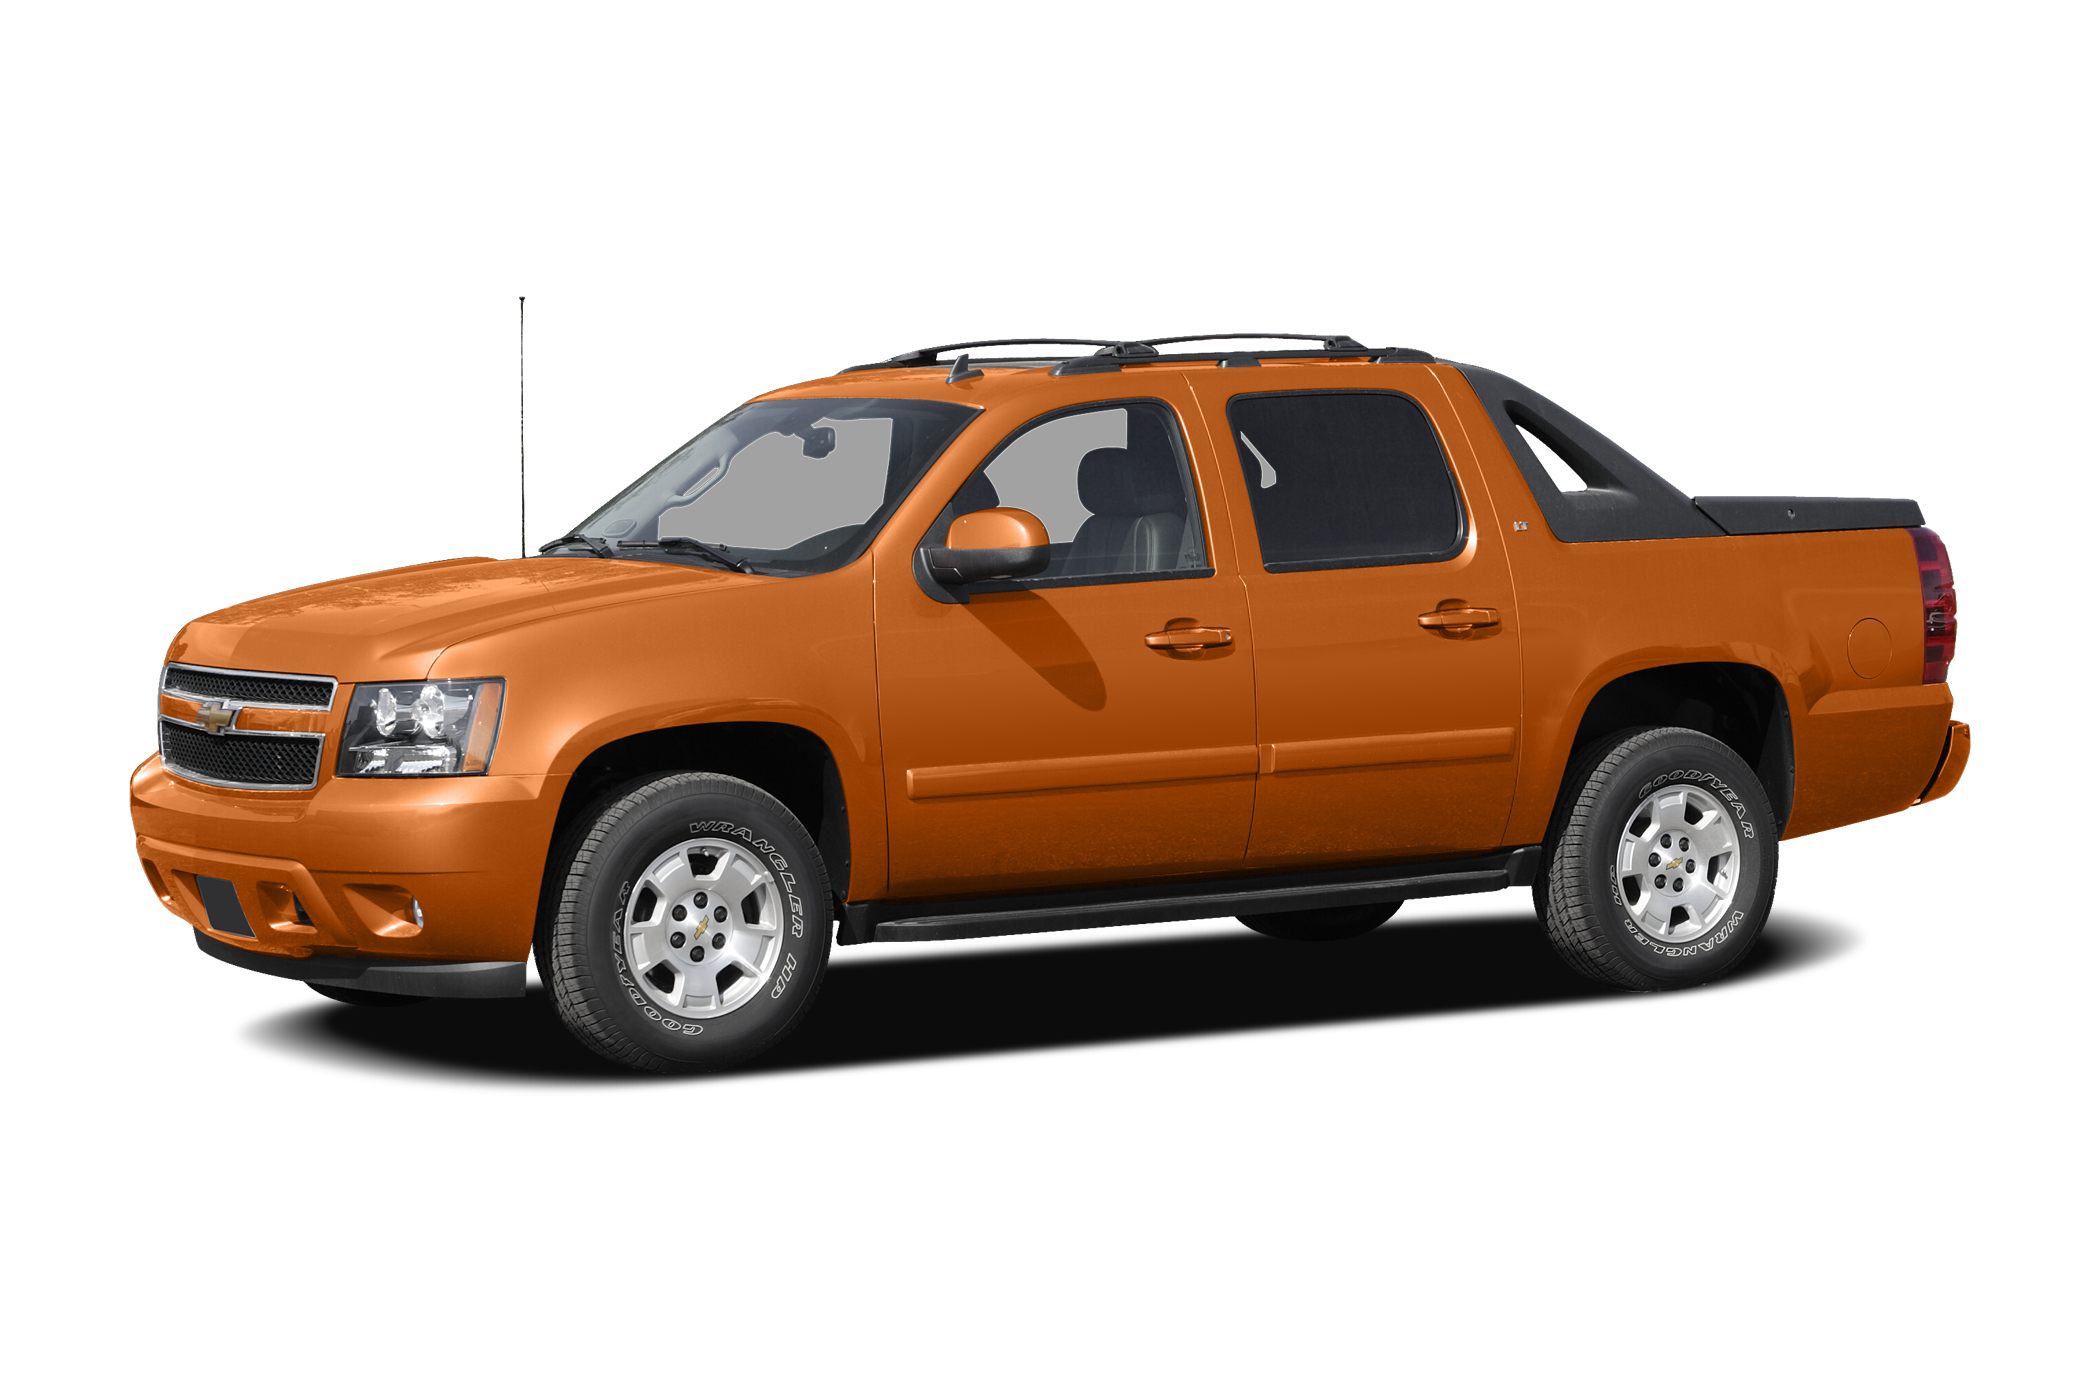 What features should you compare when buying a used Chevy Avalanche?